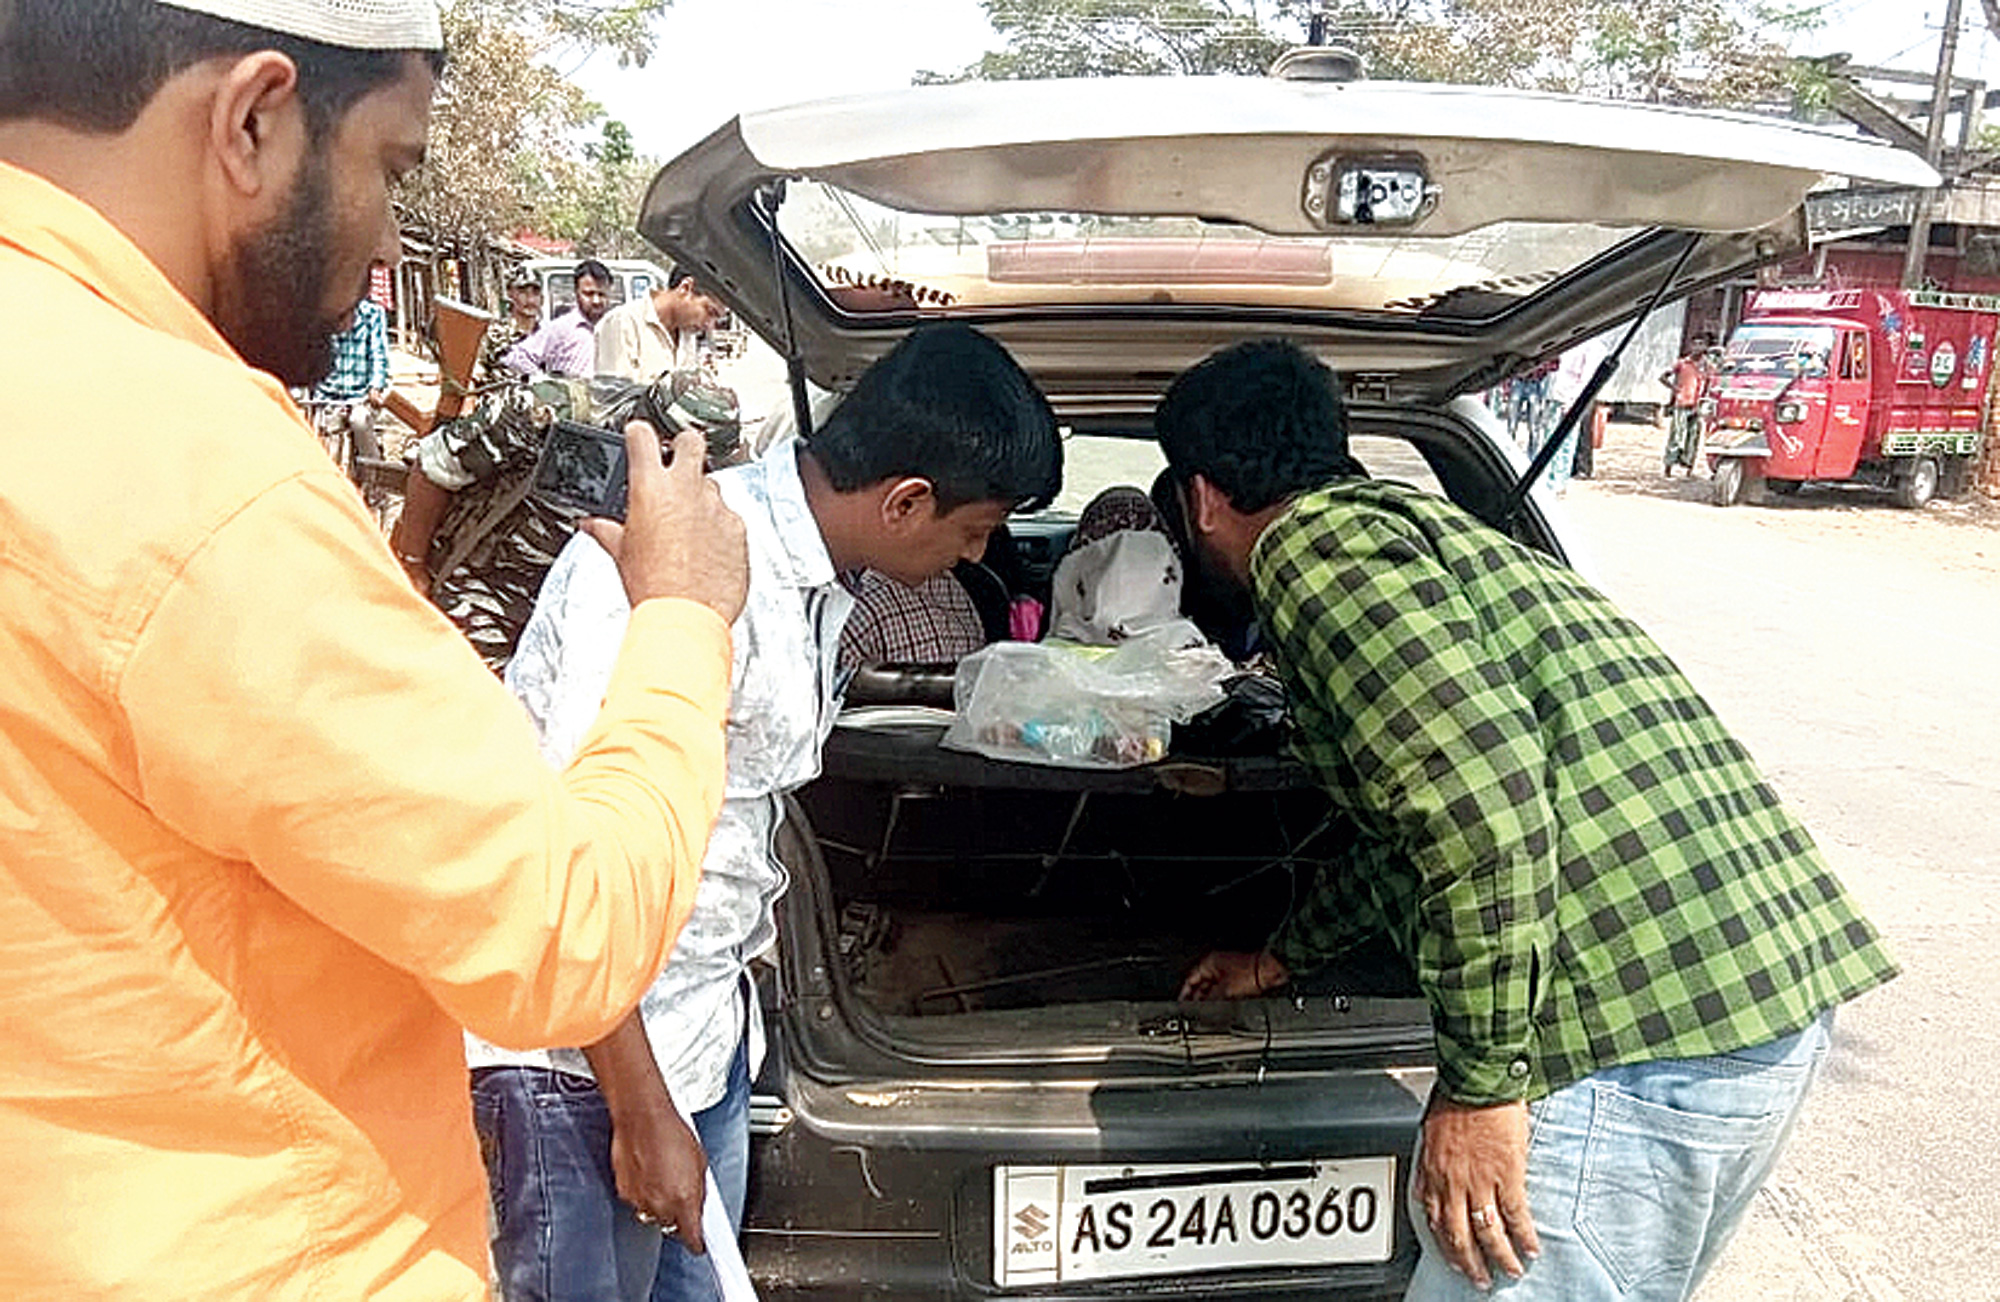 Flying squad members check a vehicle in Hailakandi.
